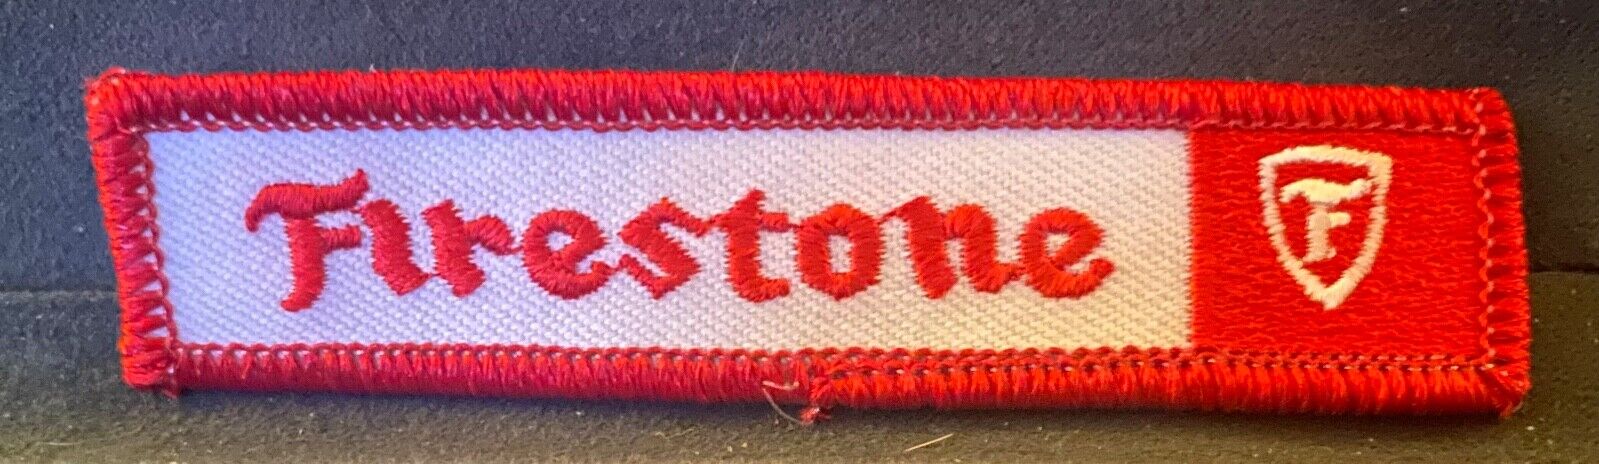 FIRESTONE TIRES ~ AUTOMOBILE ~ EMBROIDERED EMPLOYEE SHIRT PATCH